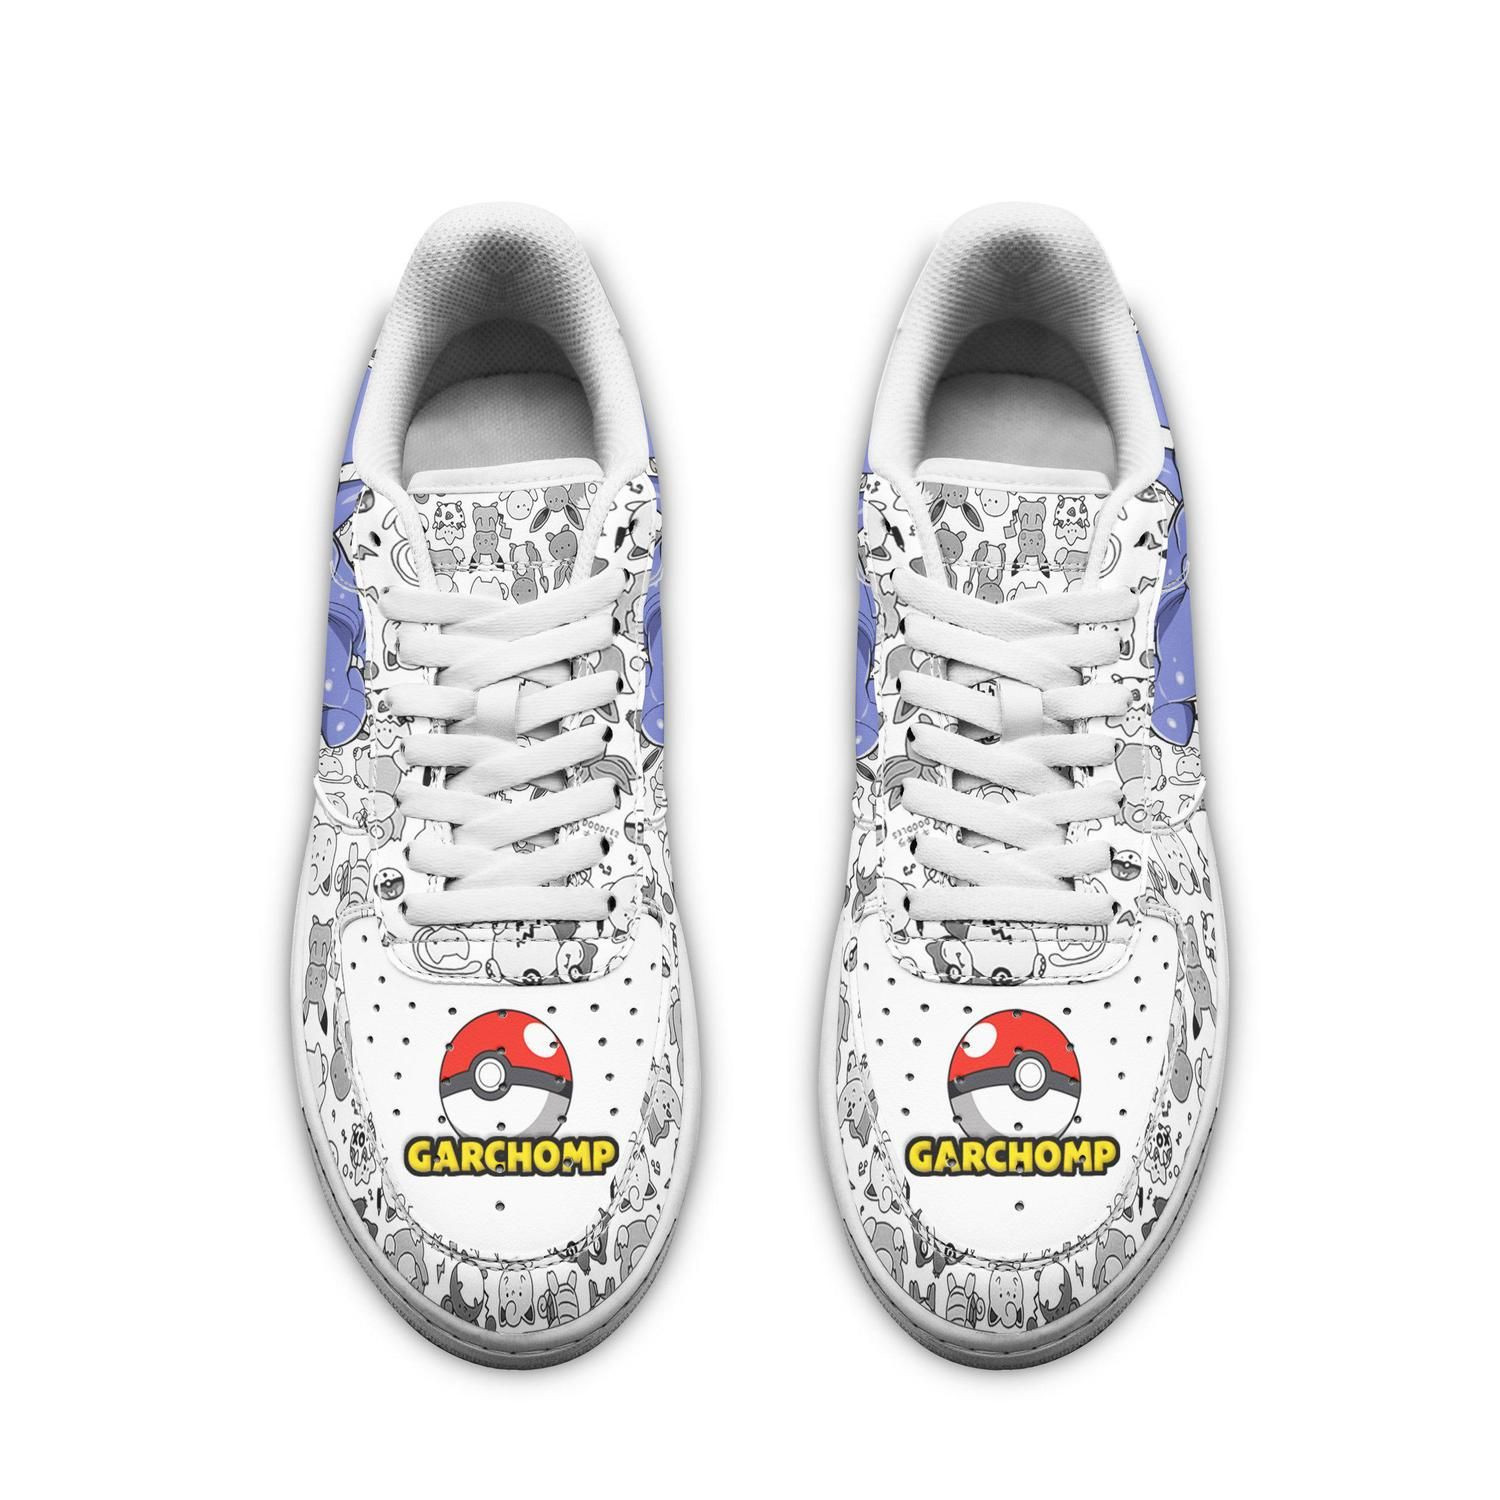 Garchomp Pokemon Air Force One Low Top Shoes Sneakers